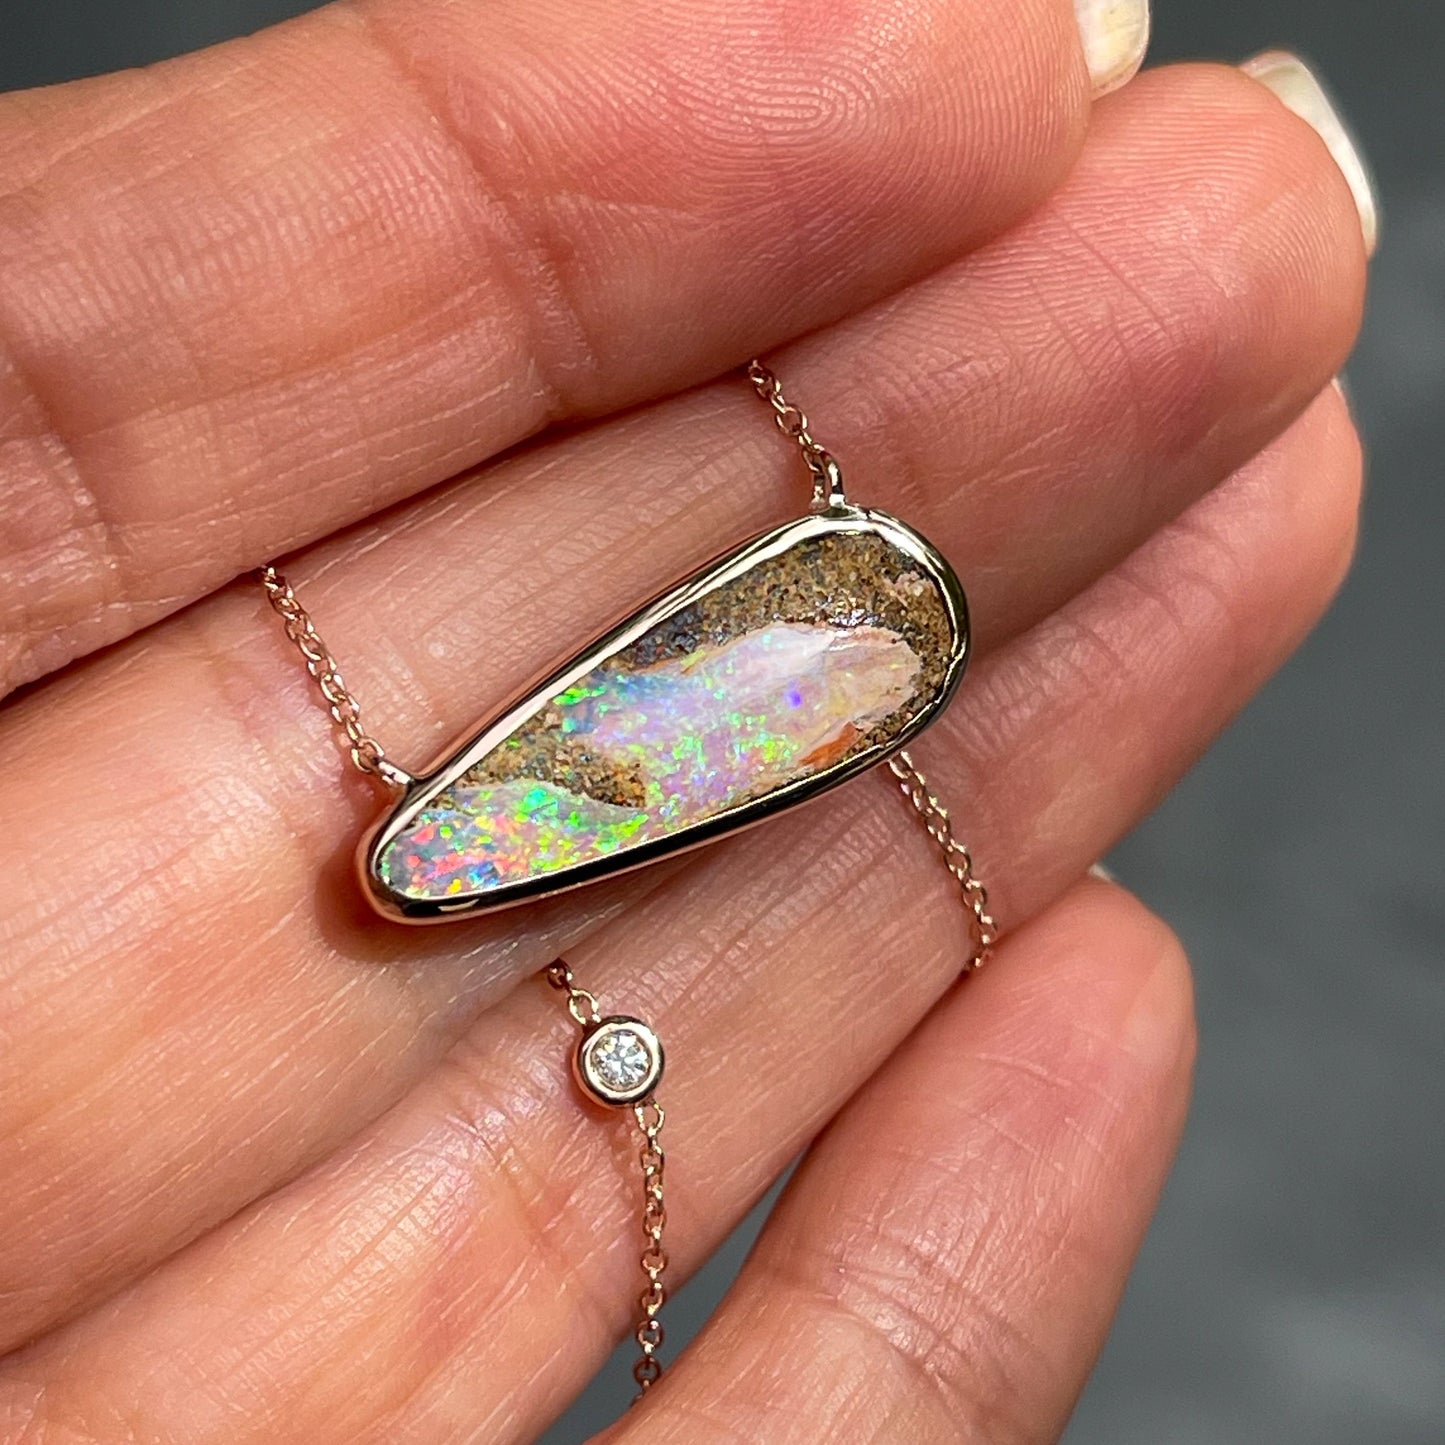 An Australian Opal Necklace by NIXIN Jewelry staged upon a hand. The pipe opal necklace is oriented horizontally and has a diamond in the delicate chain.